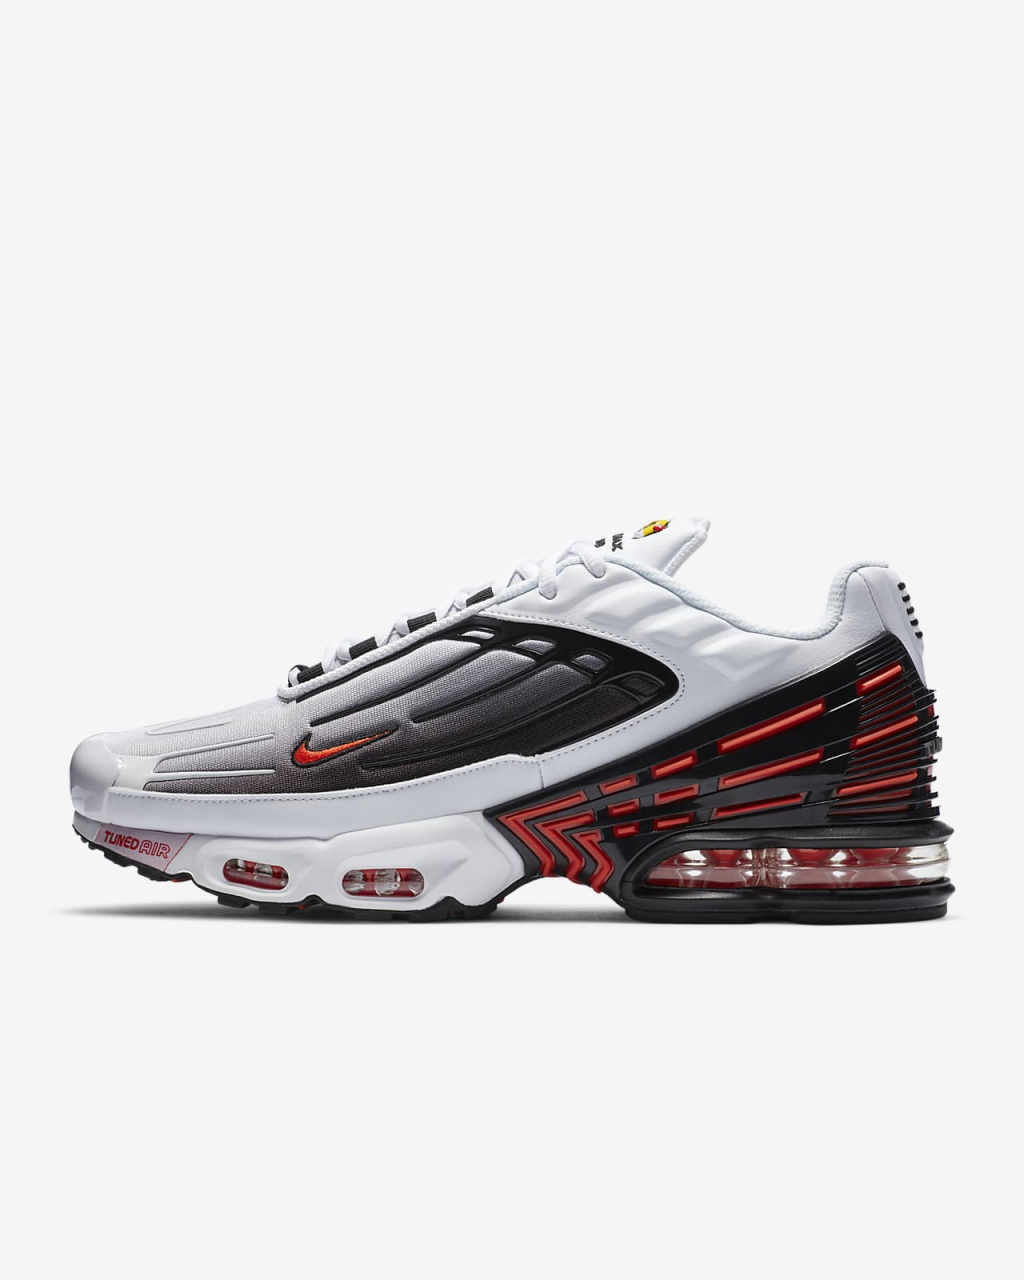 Picture of: Nike Air Max Plus  Herrenschuh